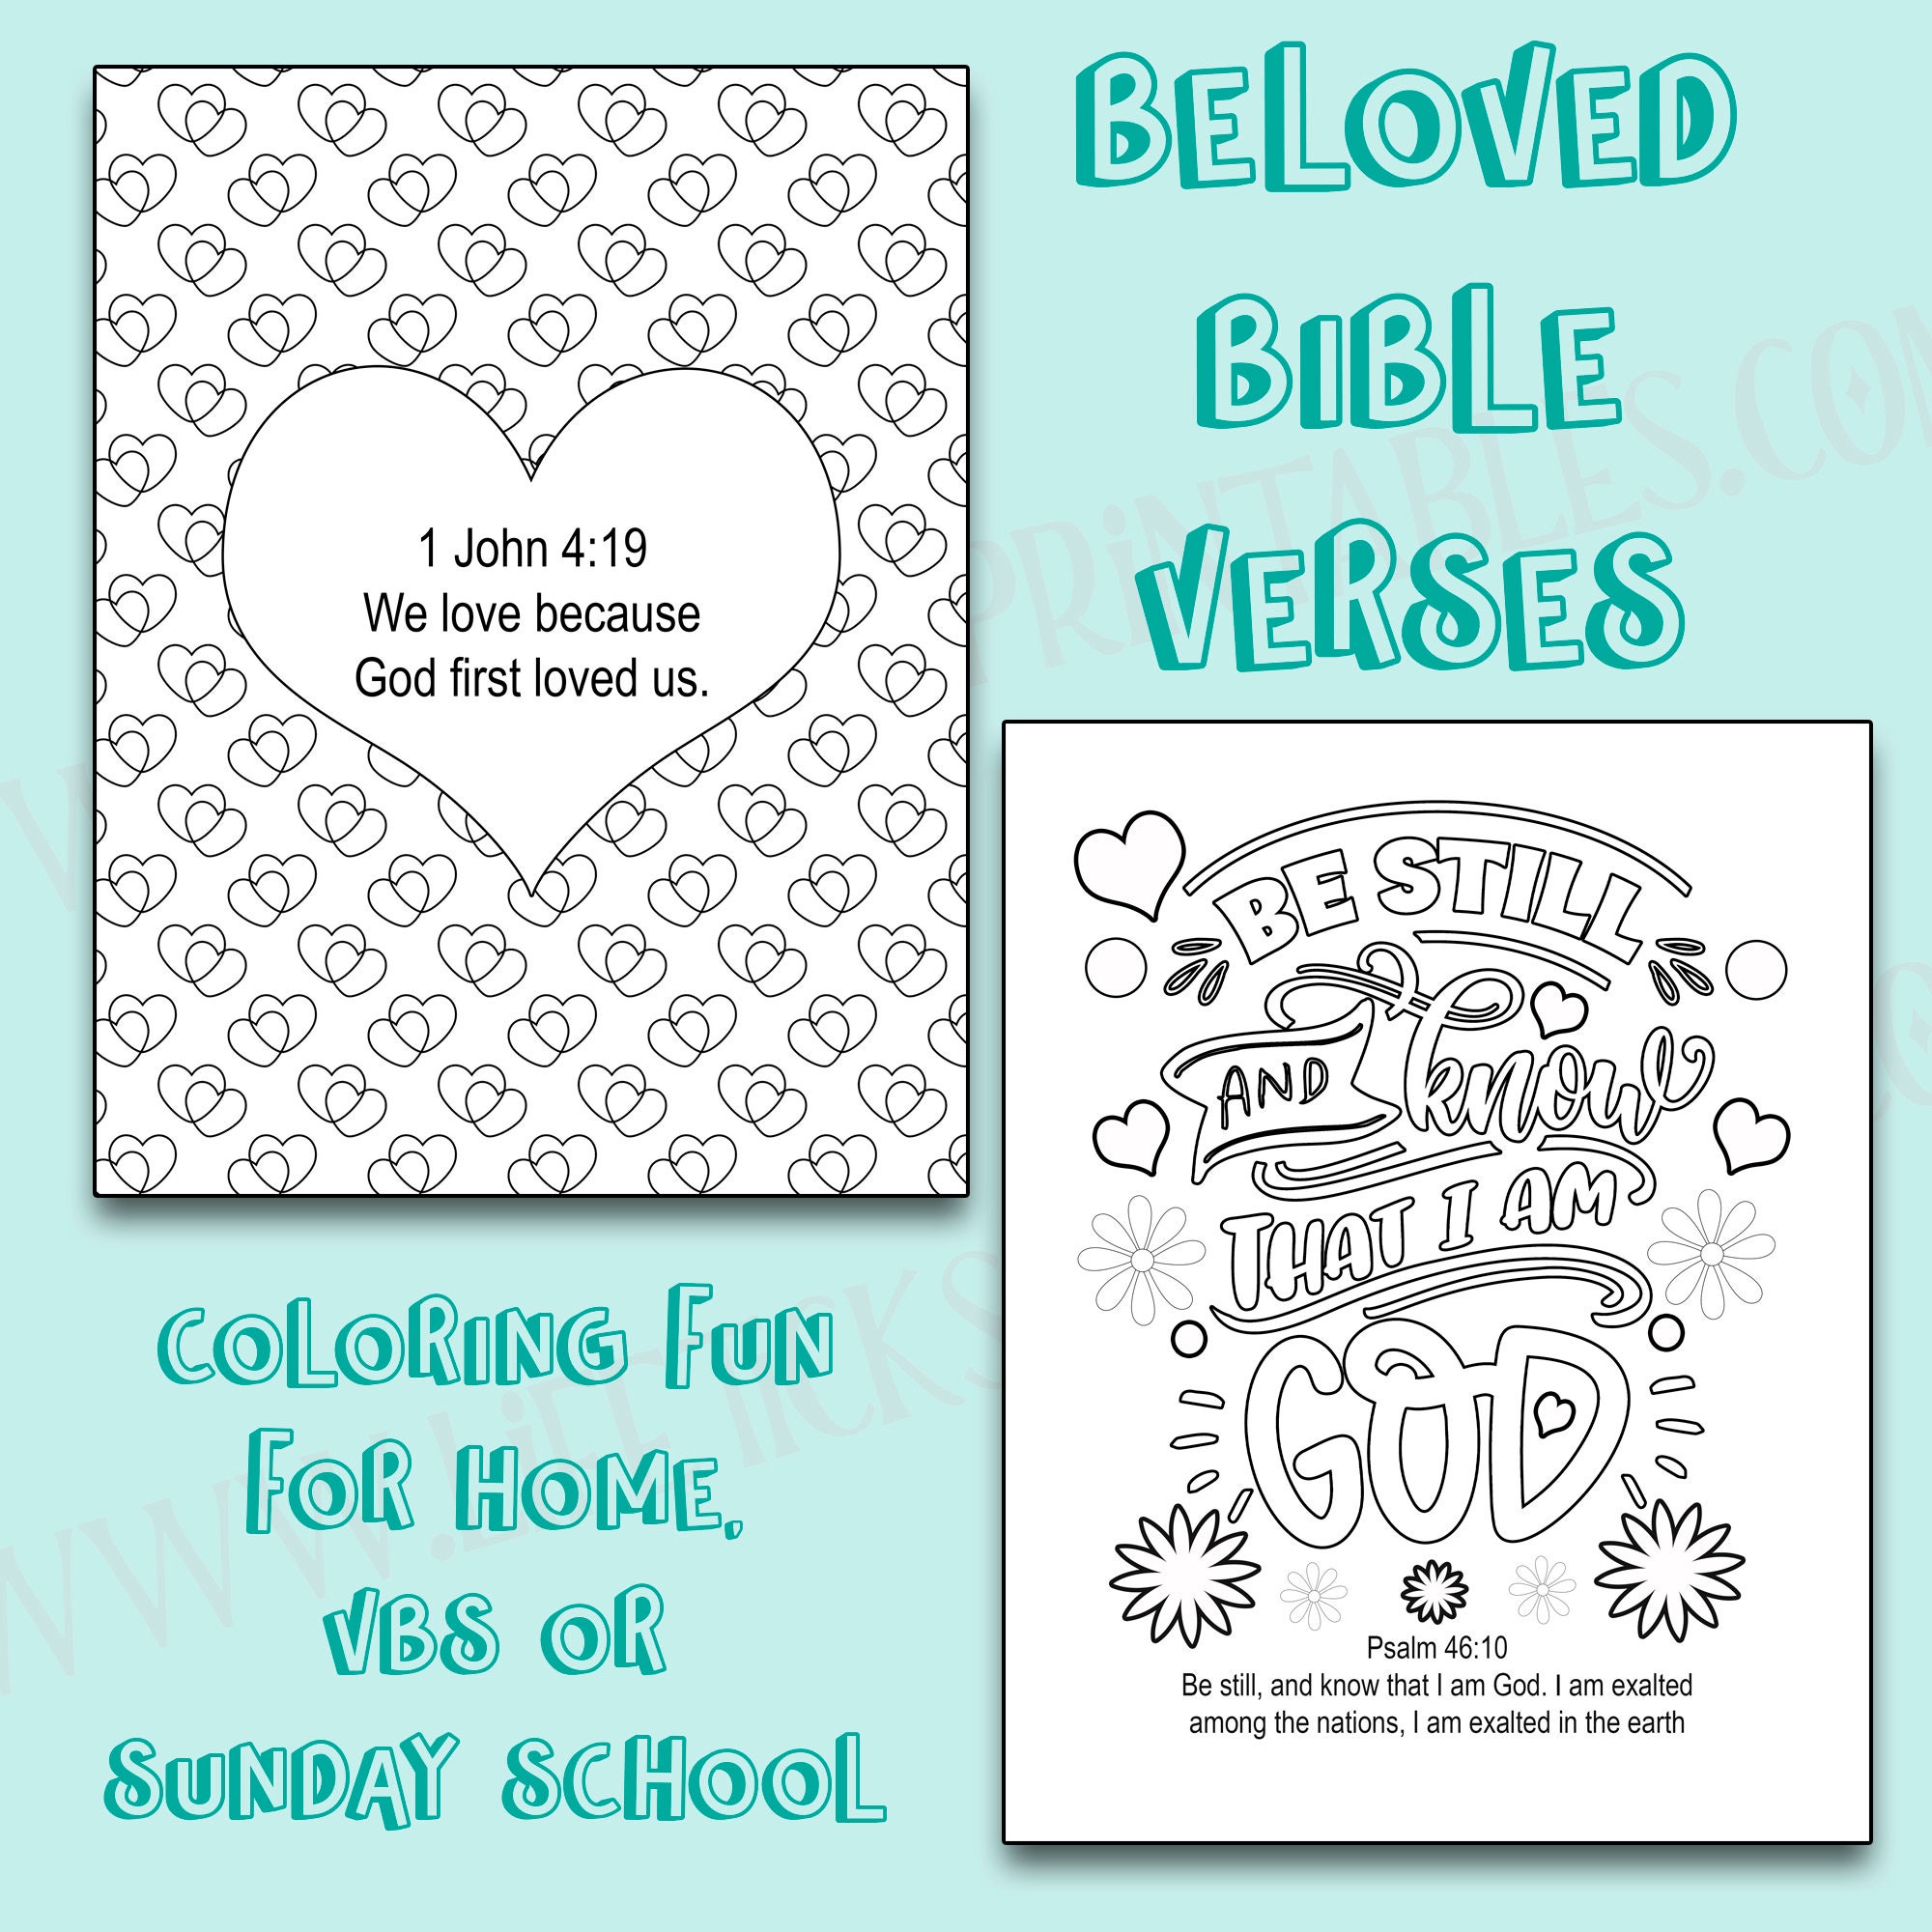 Beloved bible verses coloring sheets home or sunday school church and vacation bible school activity for all ages children adults